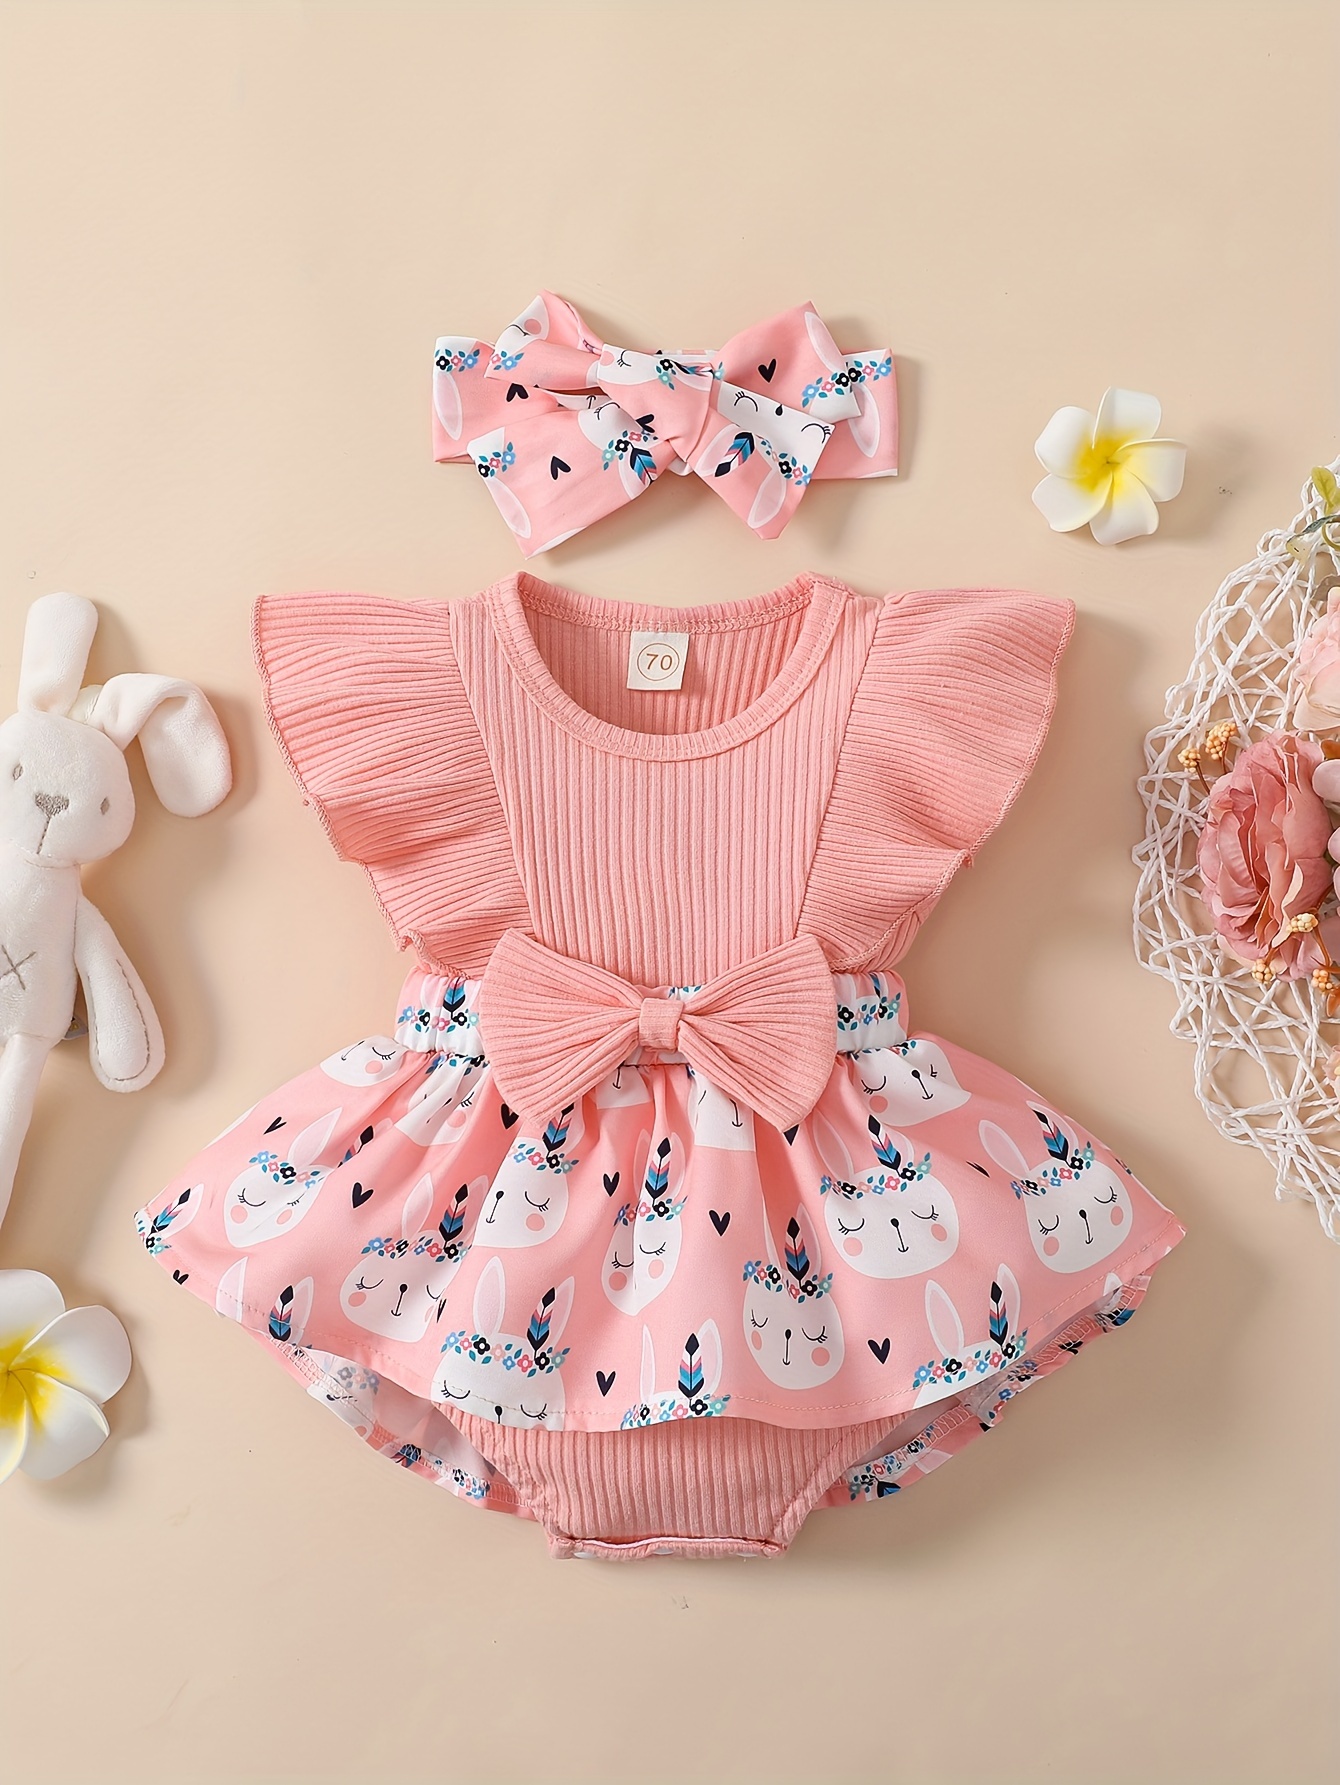 Baby Girl Easter Dress, My 1st Easter Outfit, Cotton Bunny, Baby